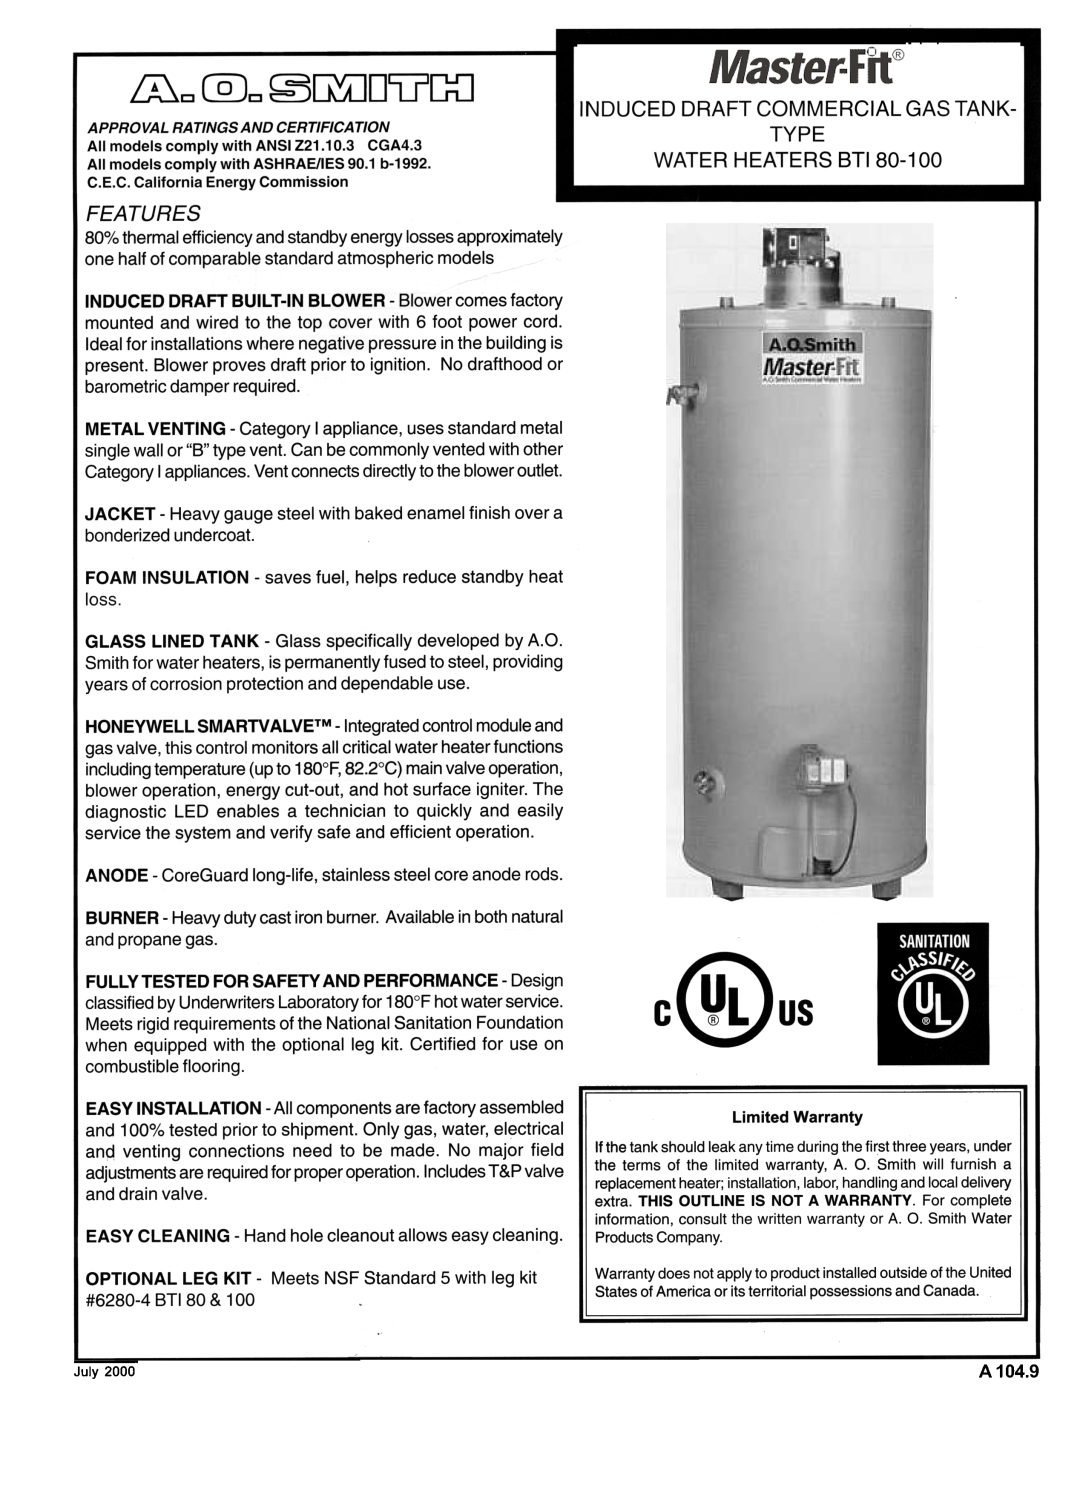 A.O. Smith warranty illc @Jc~illDv~, Features, INDUCED DRAFT COMMERCIAL GAS TANK TYPE WATER HEATERS BT180-100 